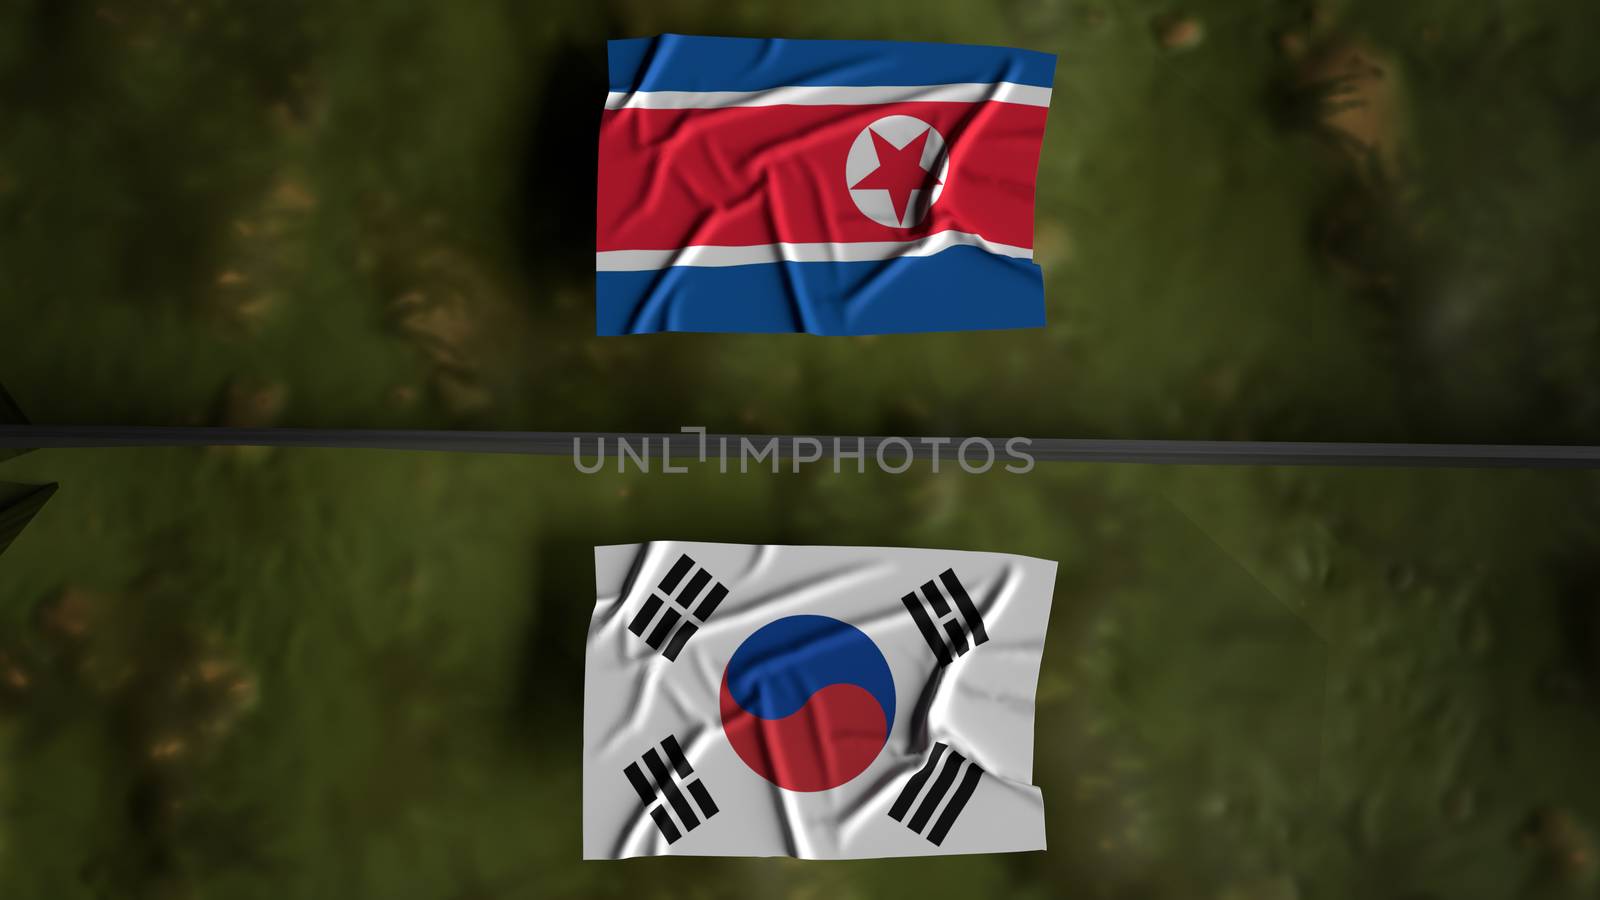 The north Korea and south Korea flags on map 3d rendering for  border content.

